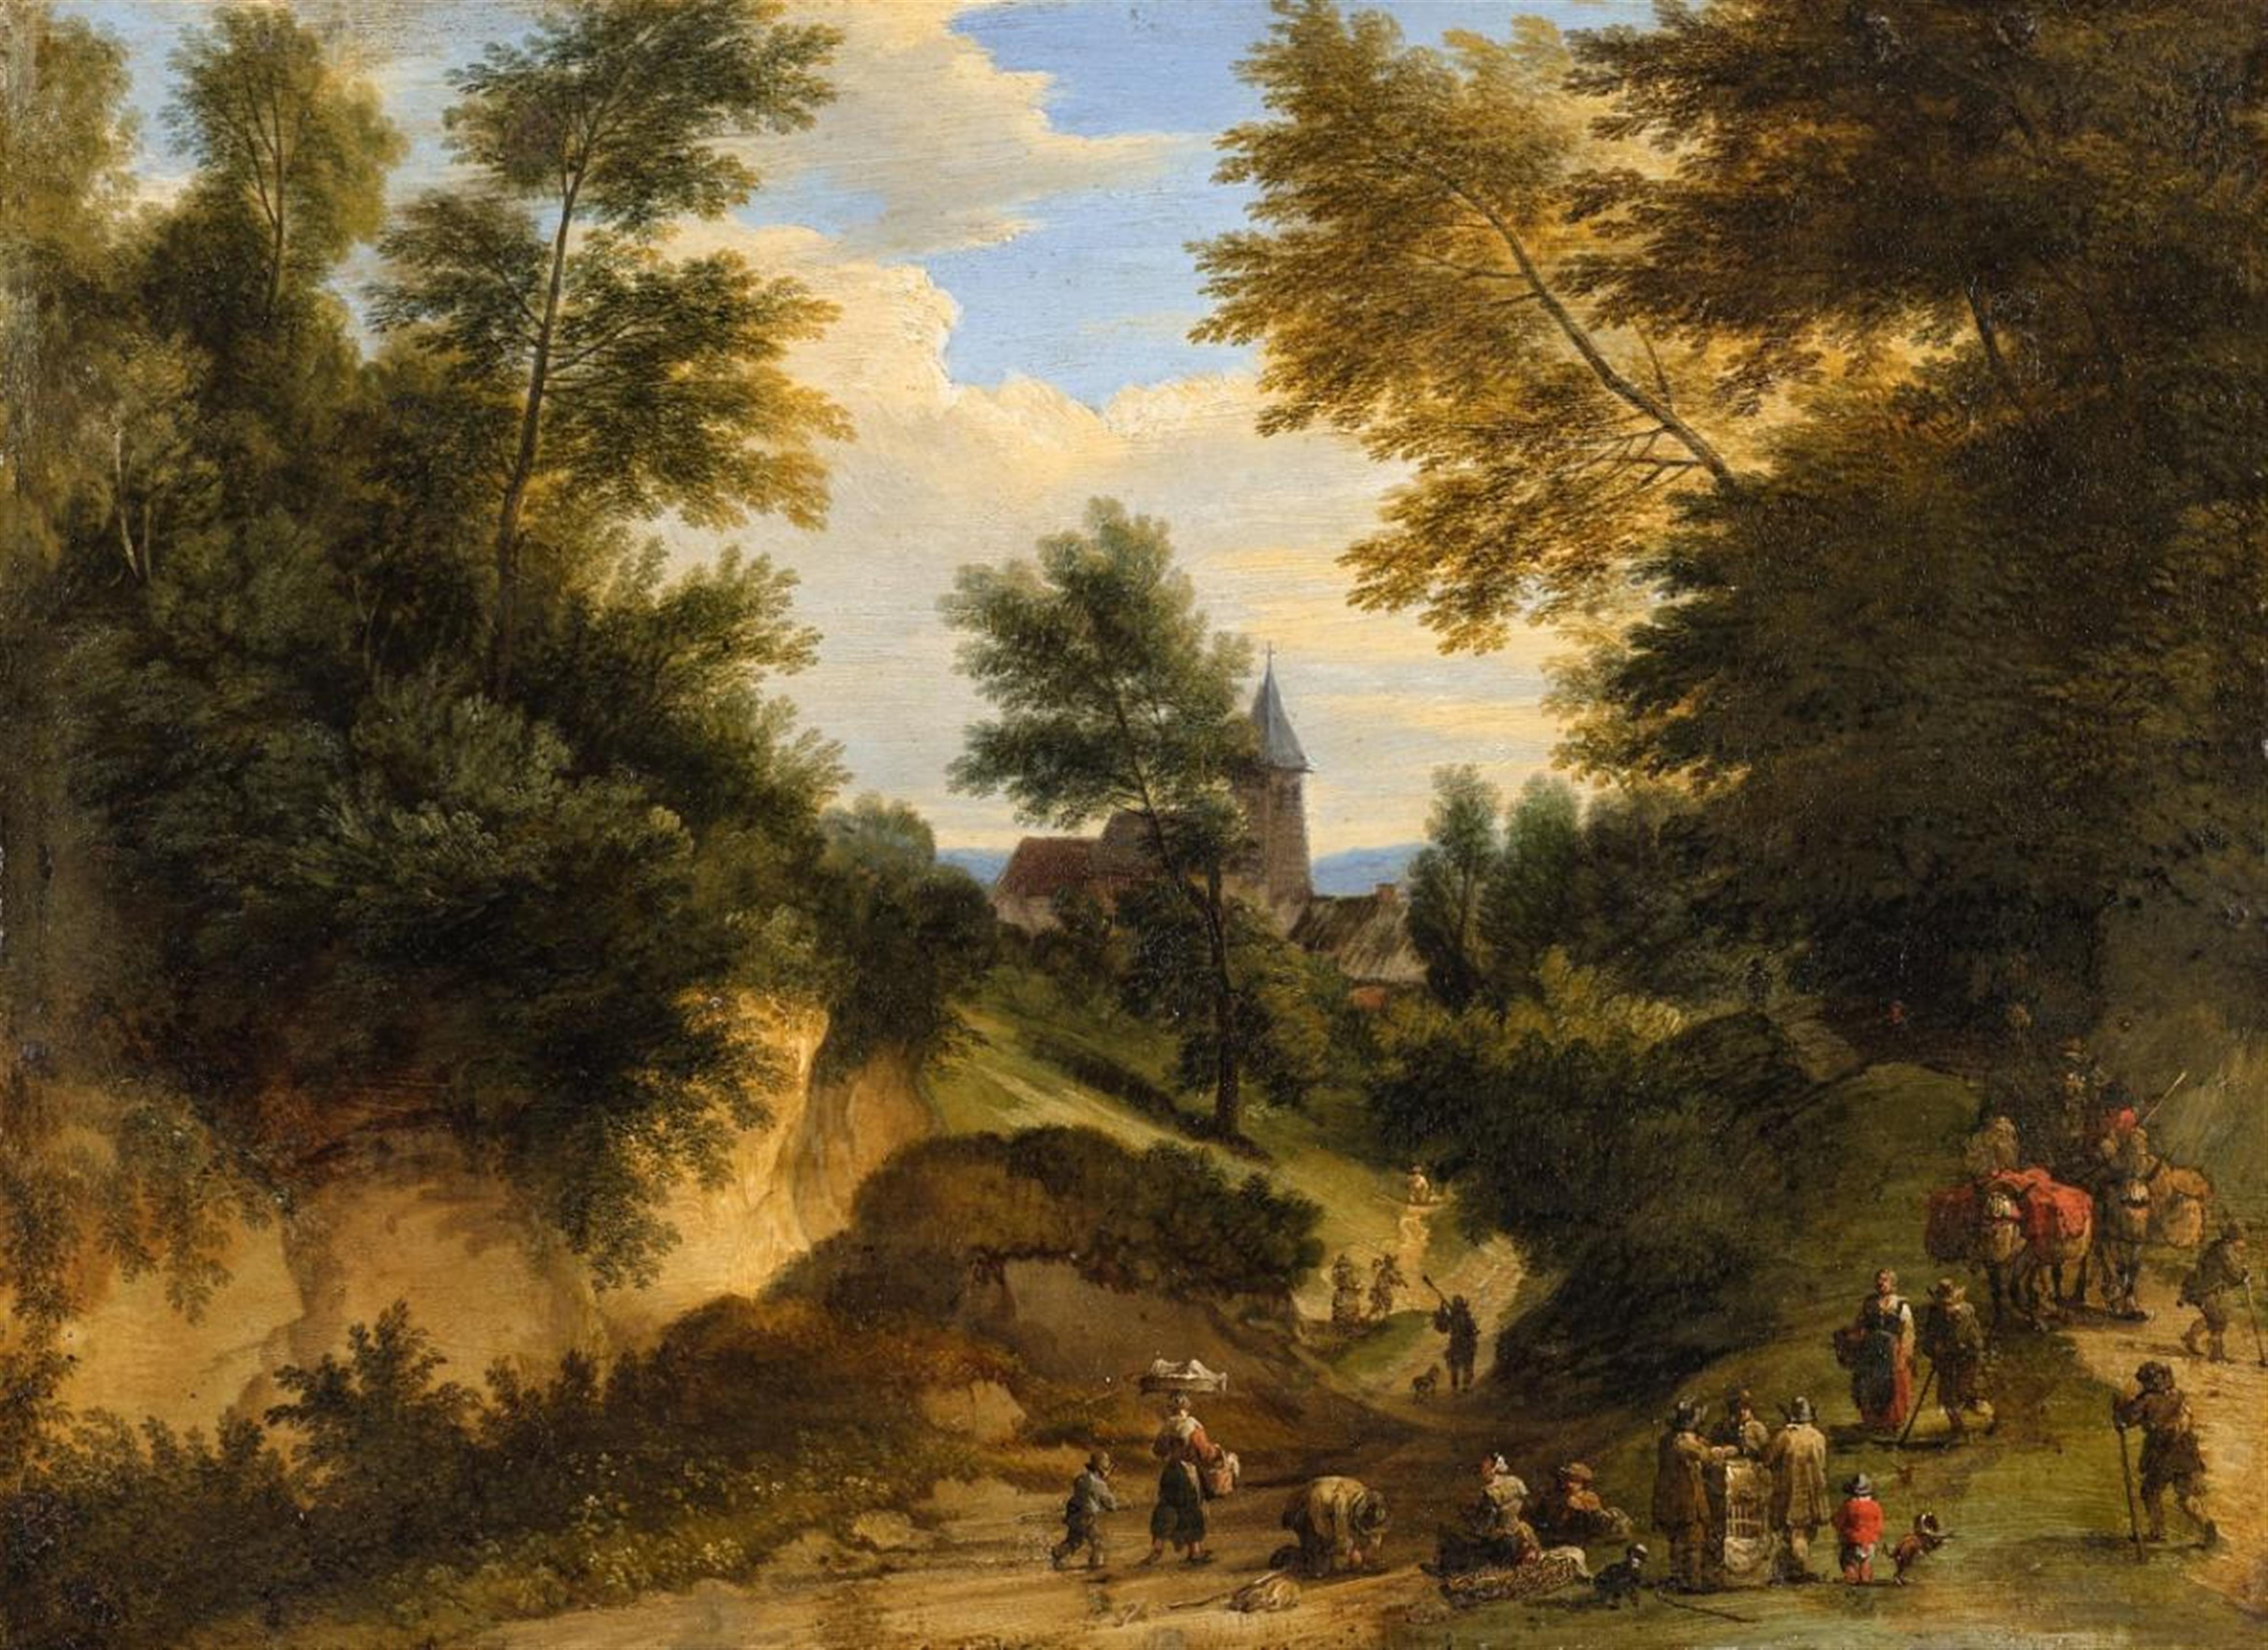 Flemish School 2nd half 17th century - Landscape with Church and Peasants - image-1